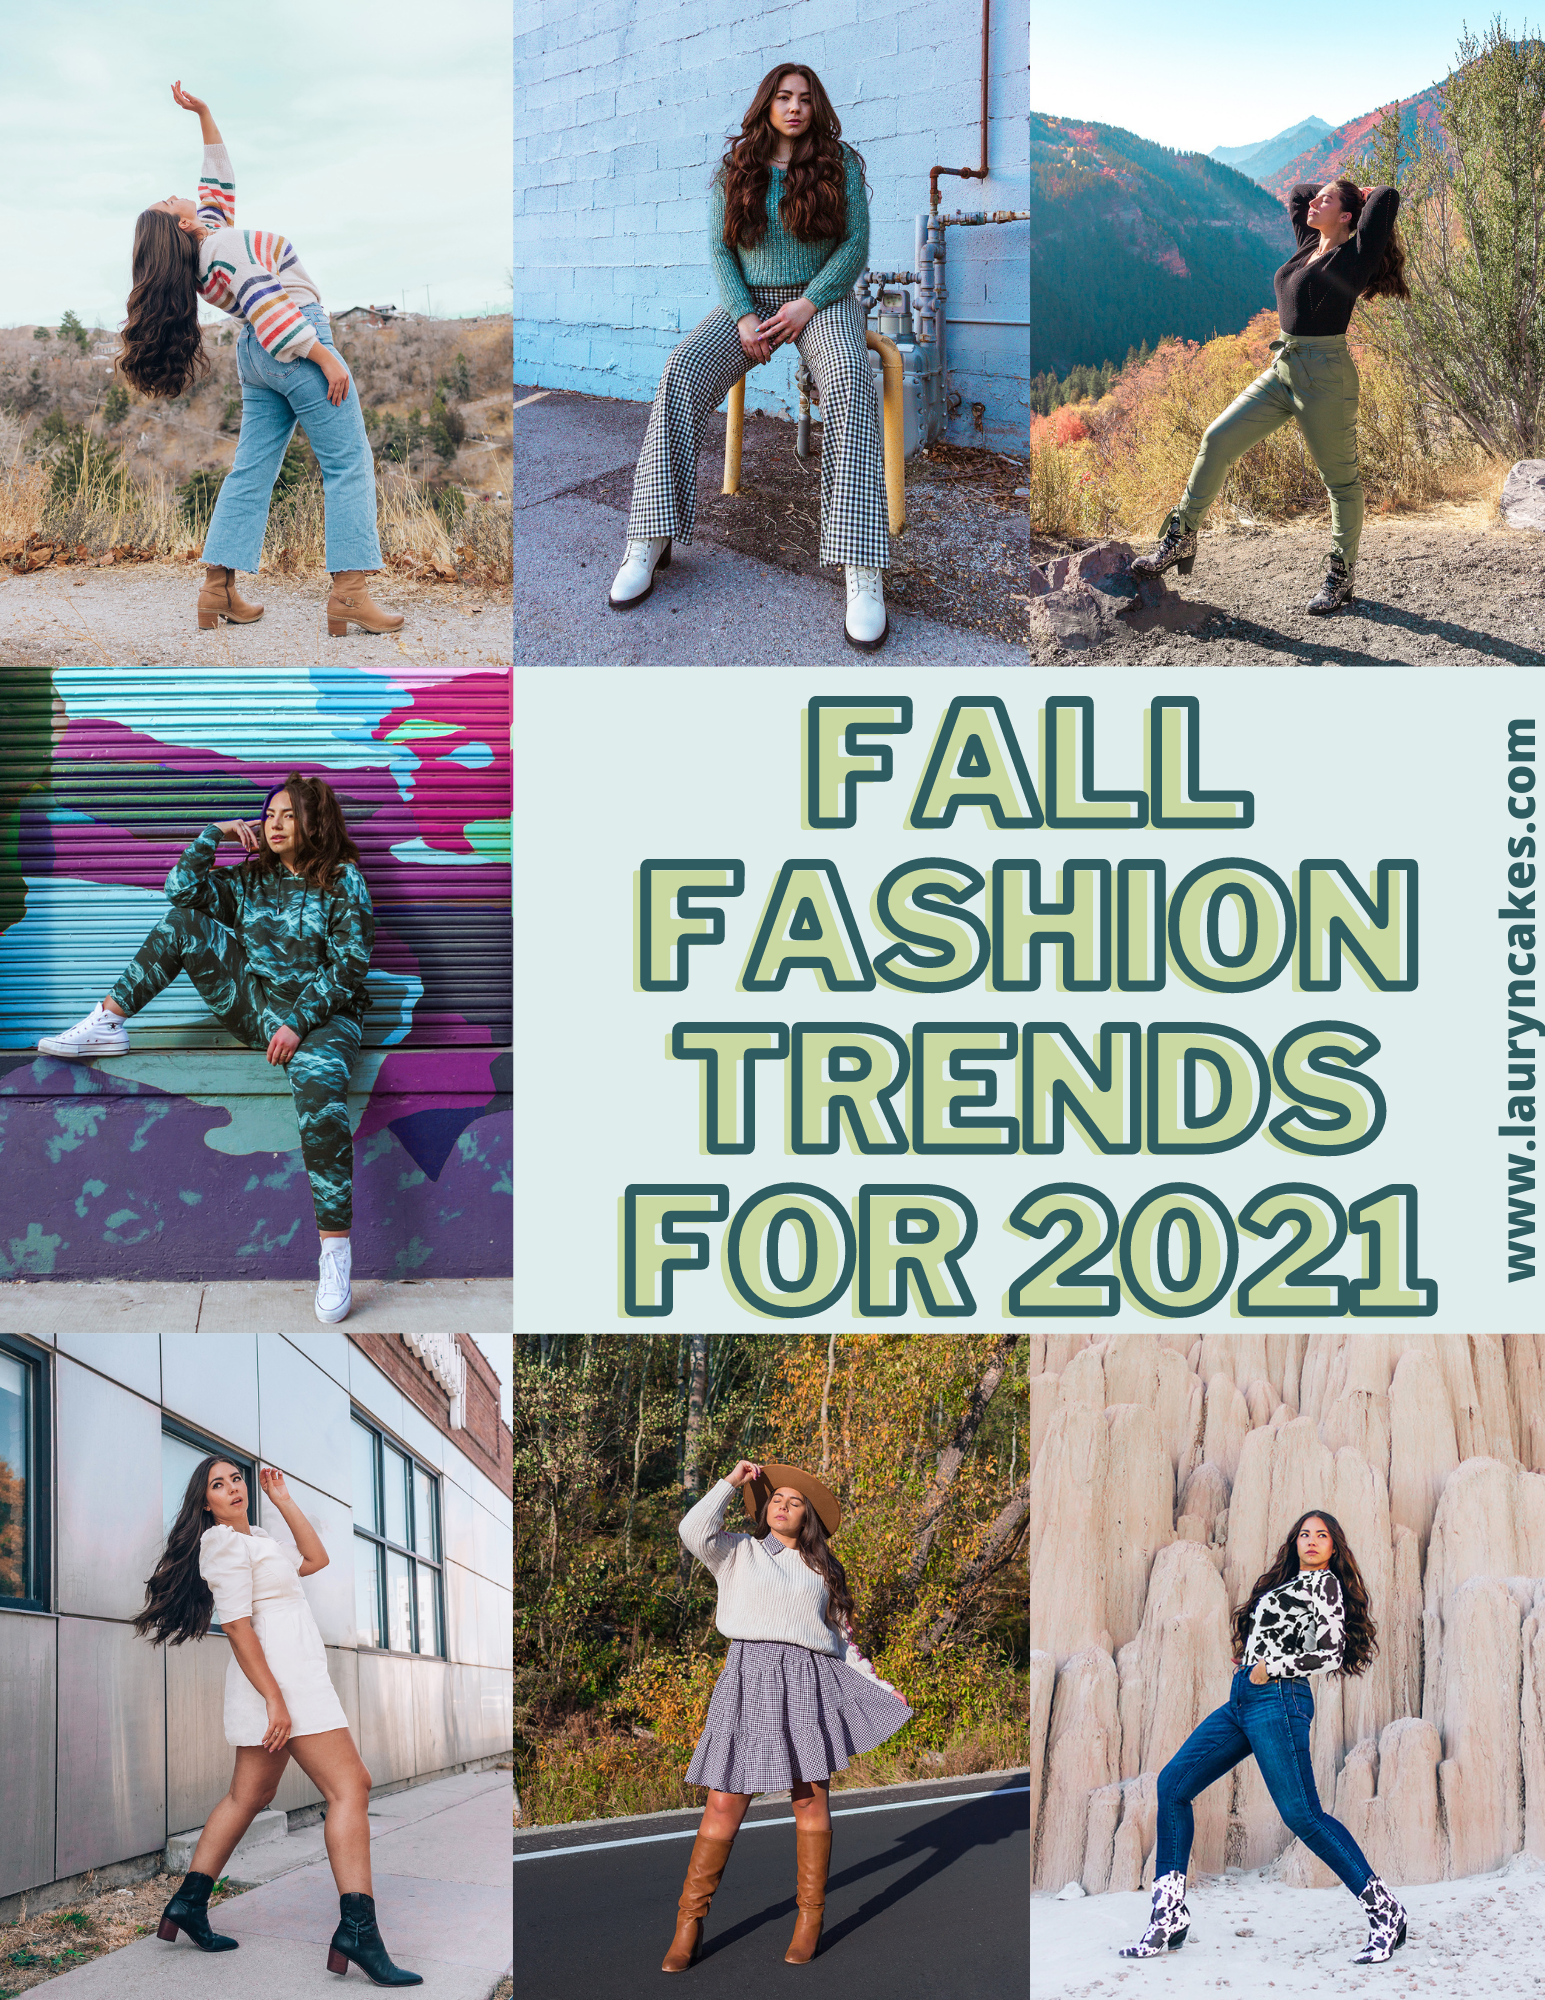 Top 5+5 of 2021: Fashion trends – tjTODAY